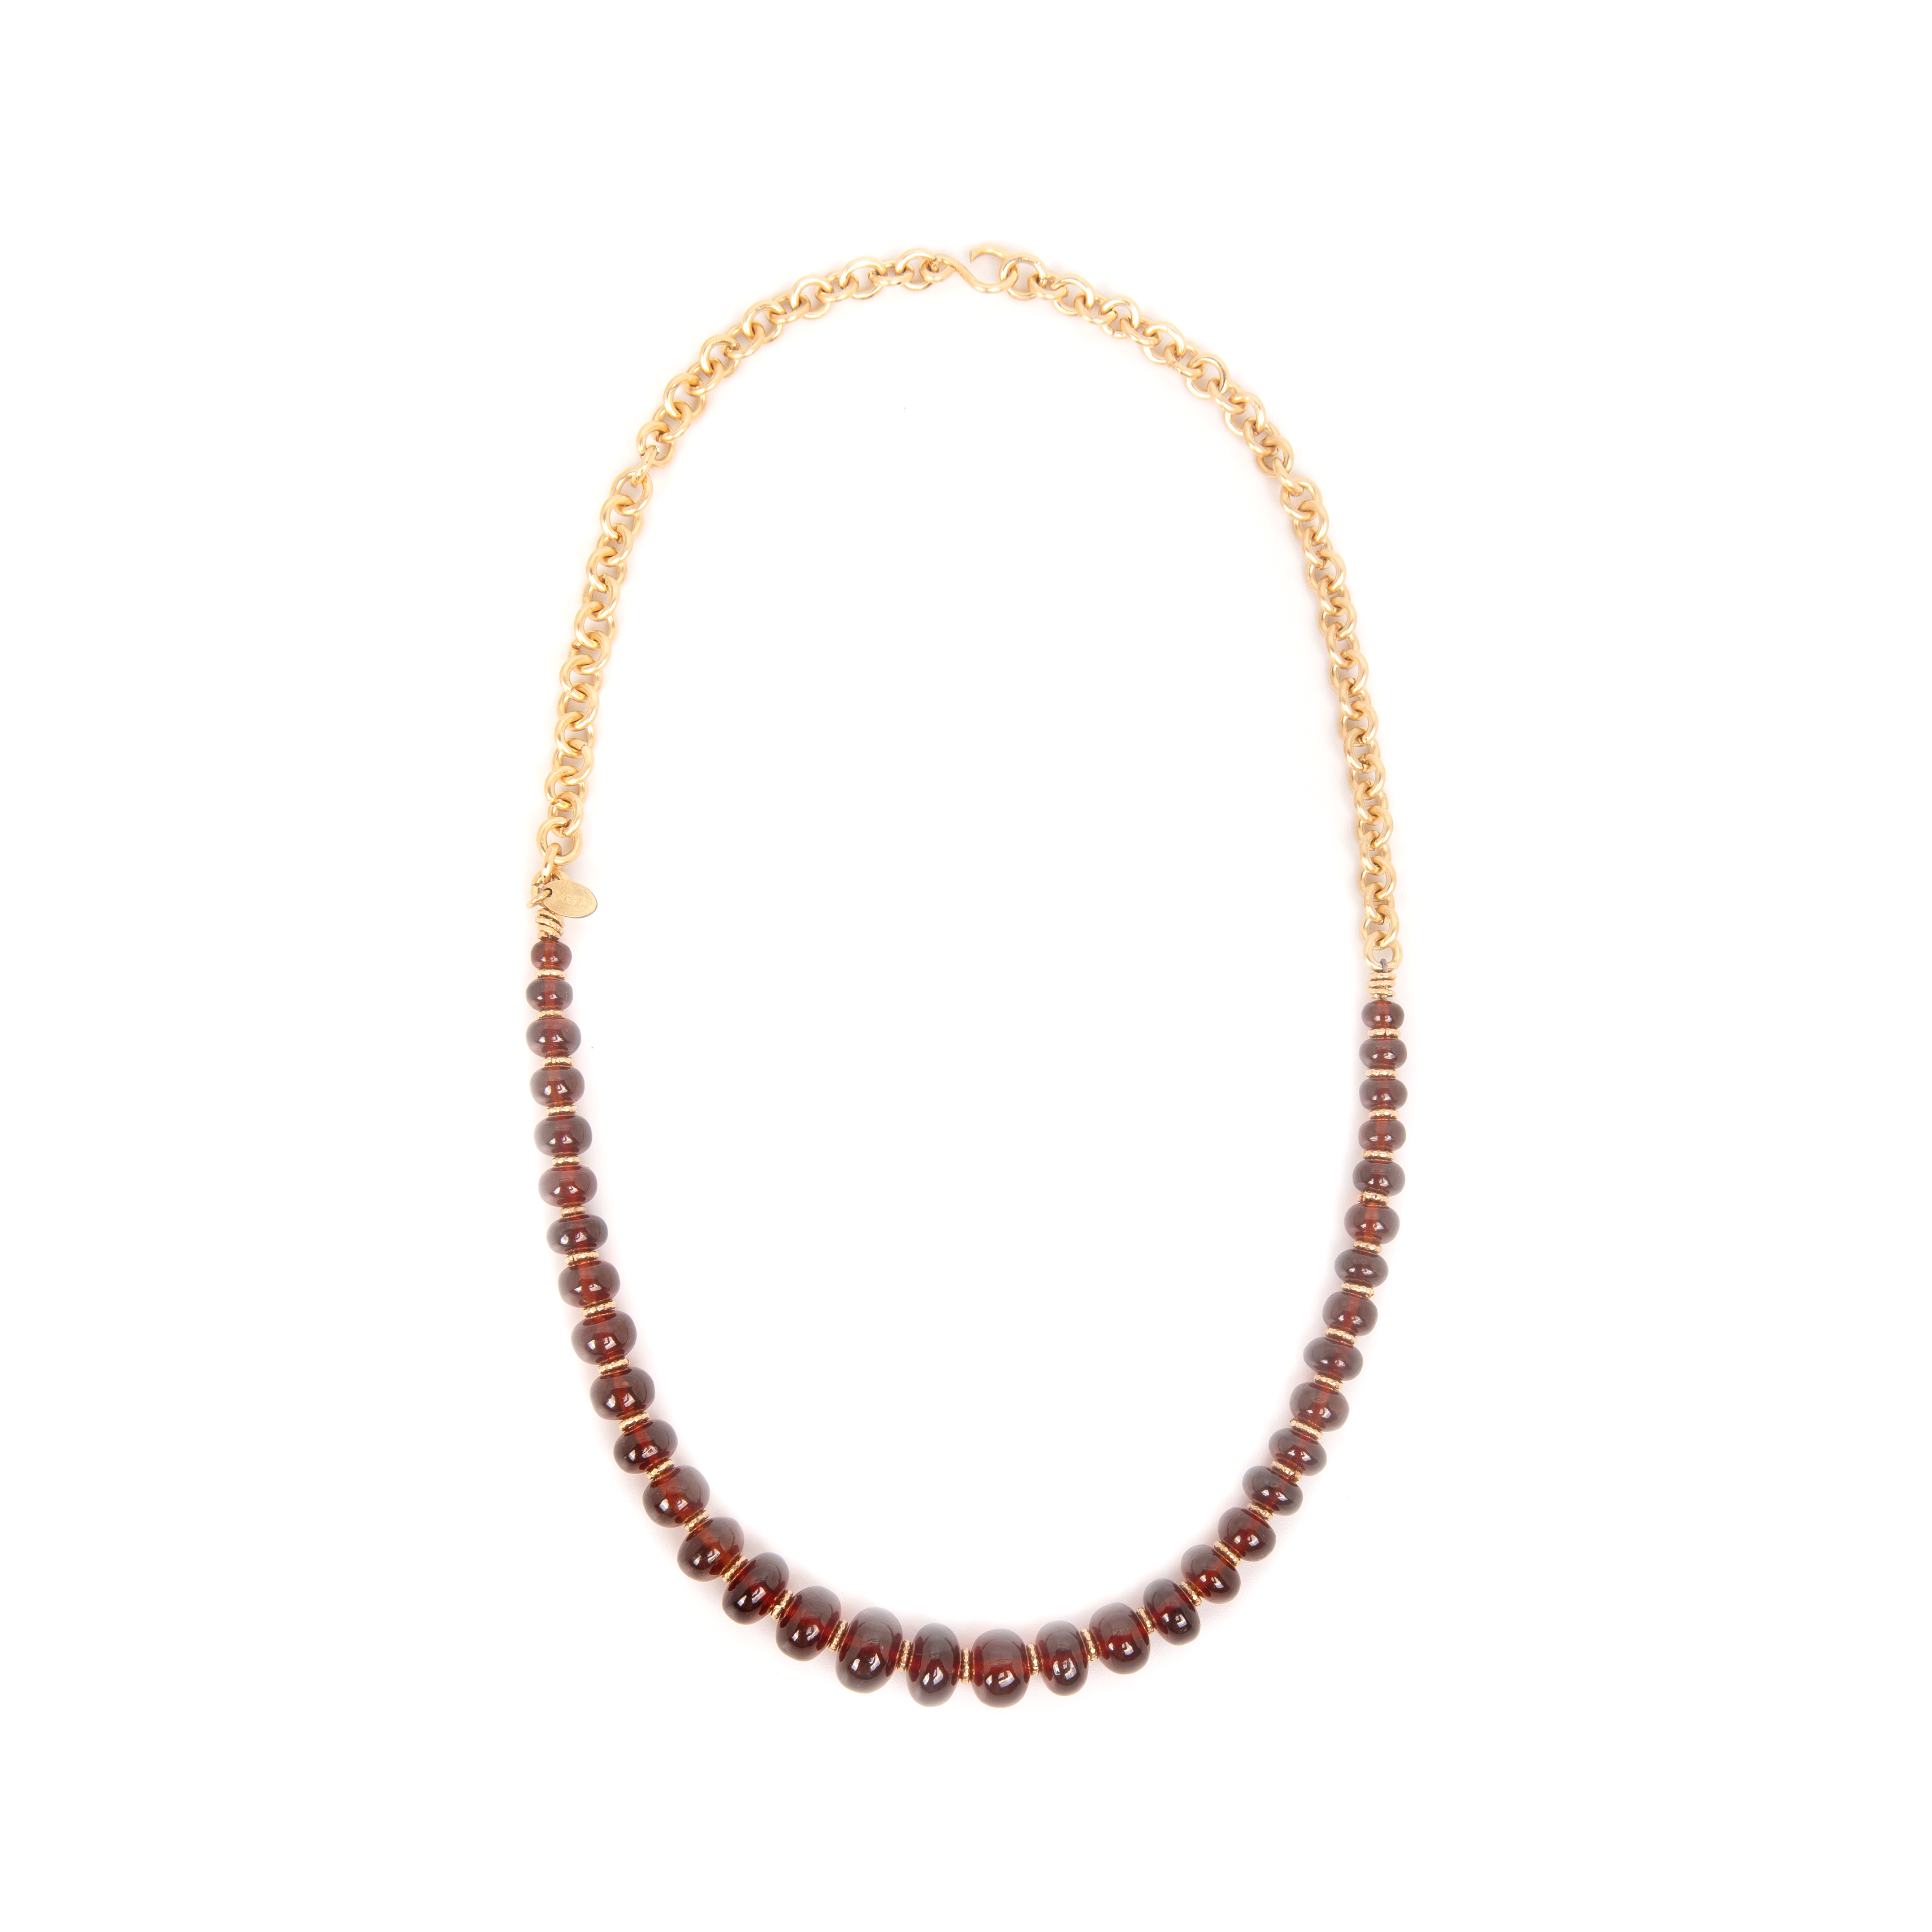 Isabel Necklace #1 (45cm) - Hessonite Necklaces TARBAY   